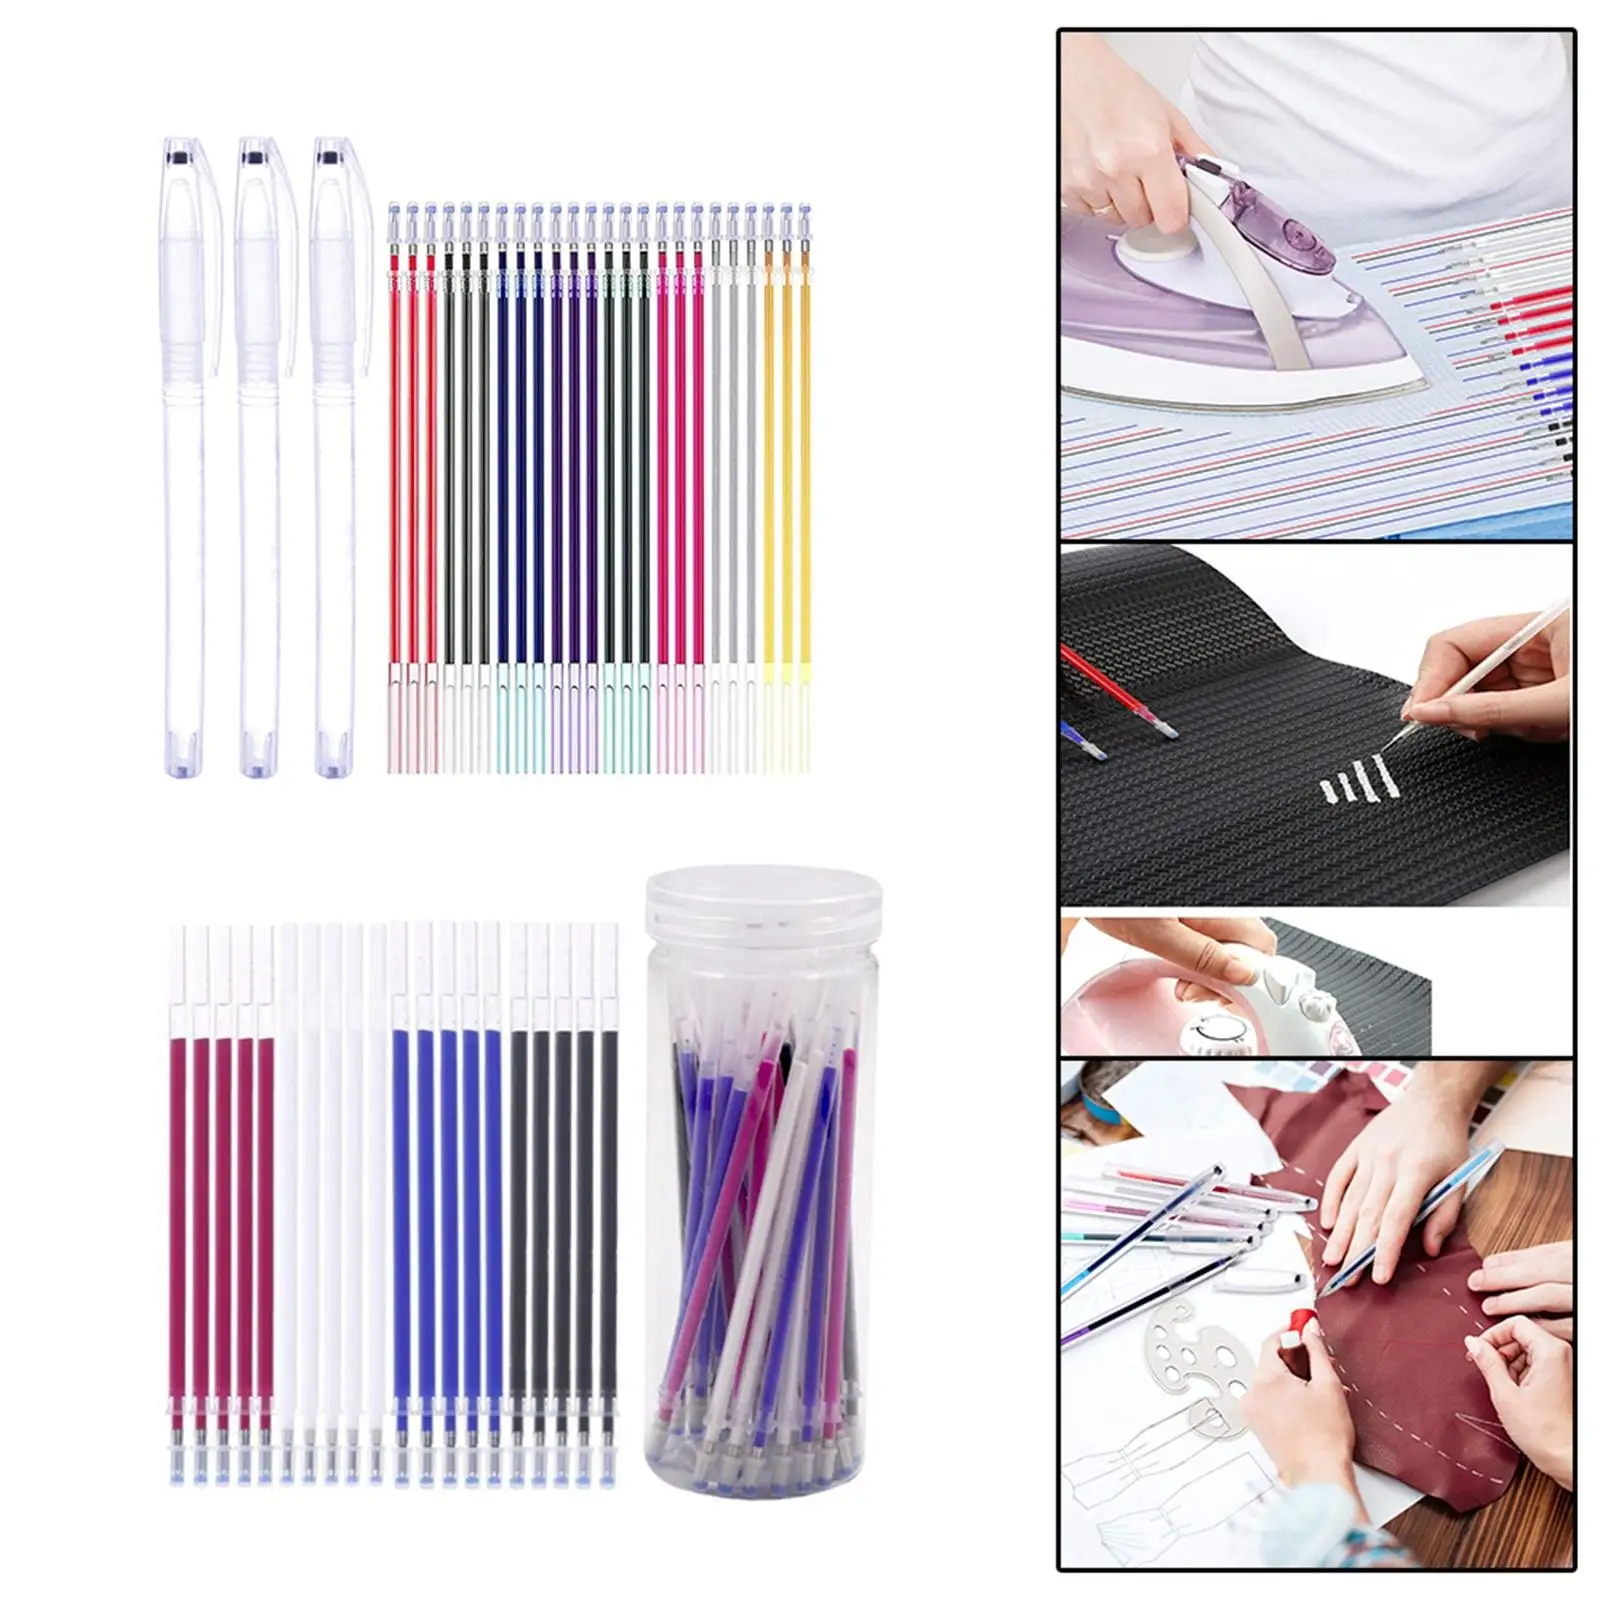 Portable Heat Erasable Pen Refills Fabric Marker DIY Replaceable Refills Vanishing for Tailors Quilting Embroidery Dressmaking